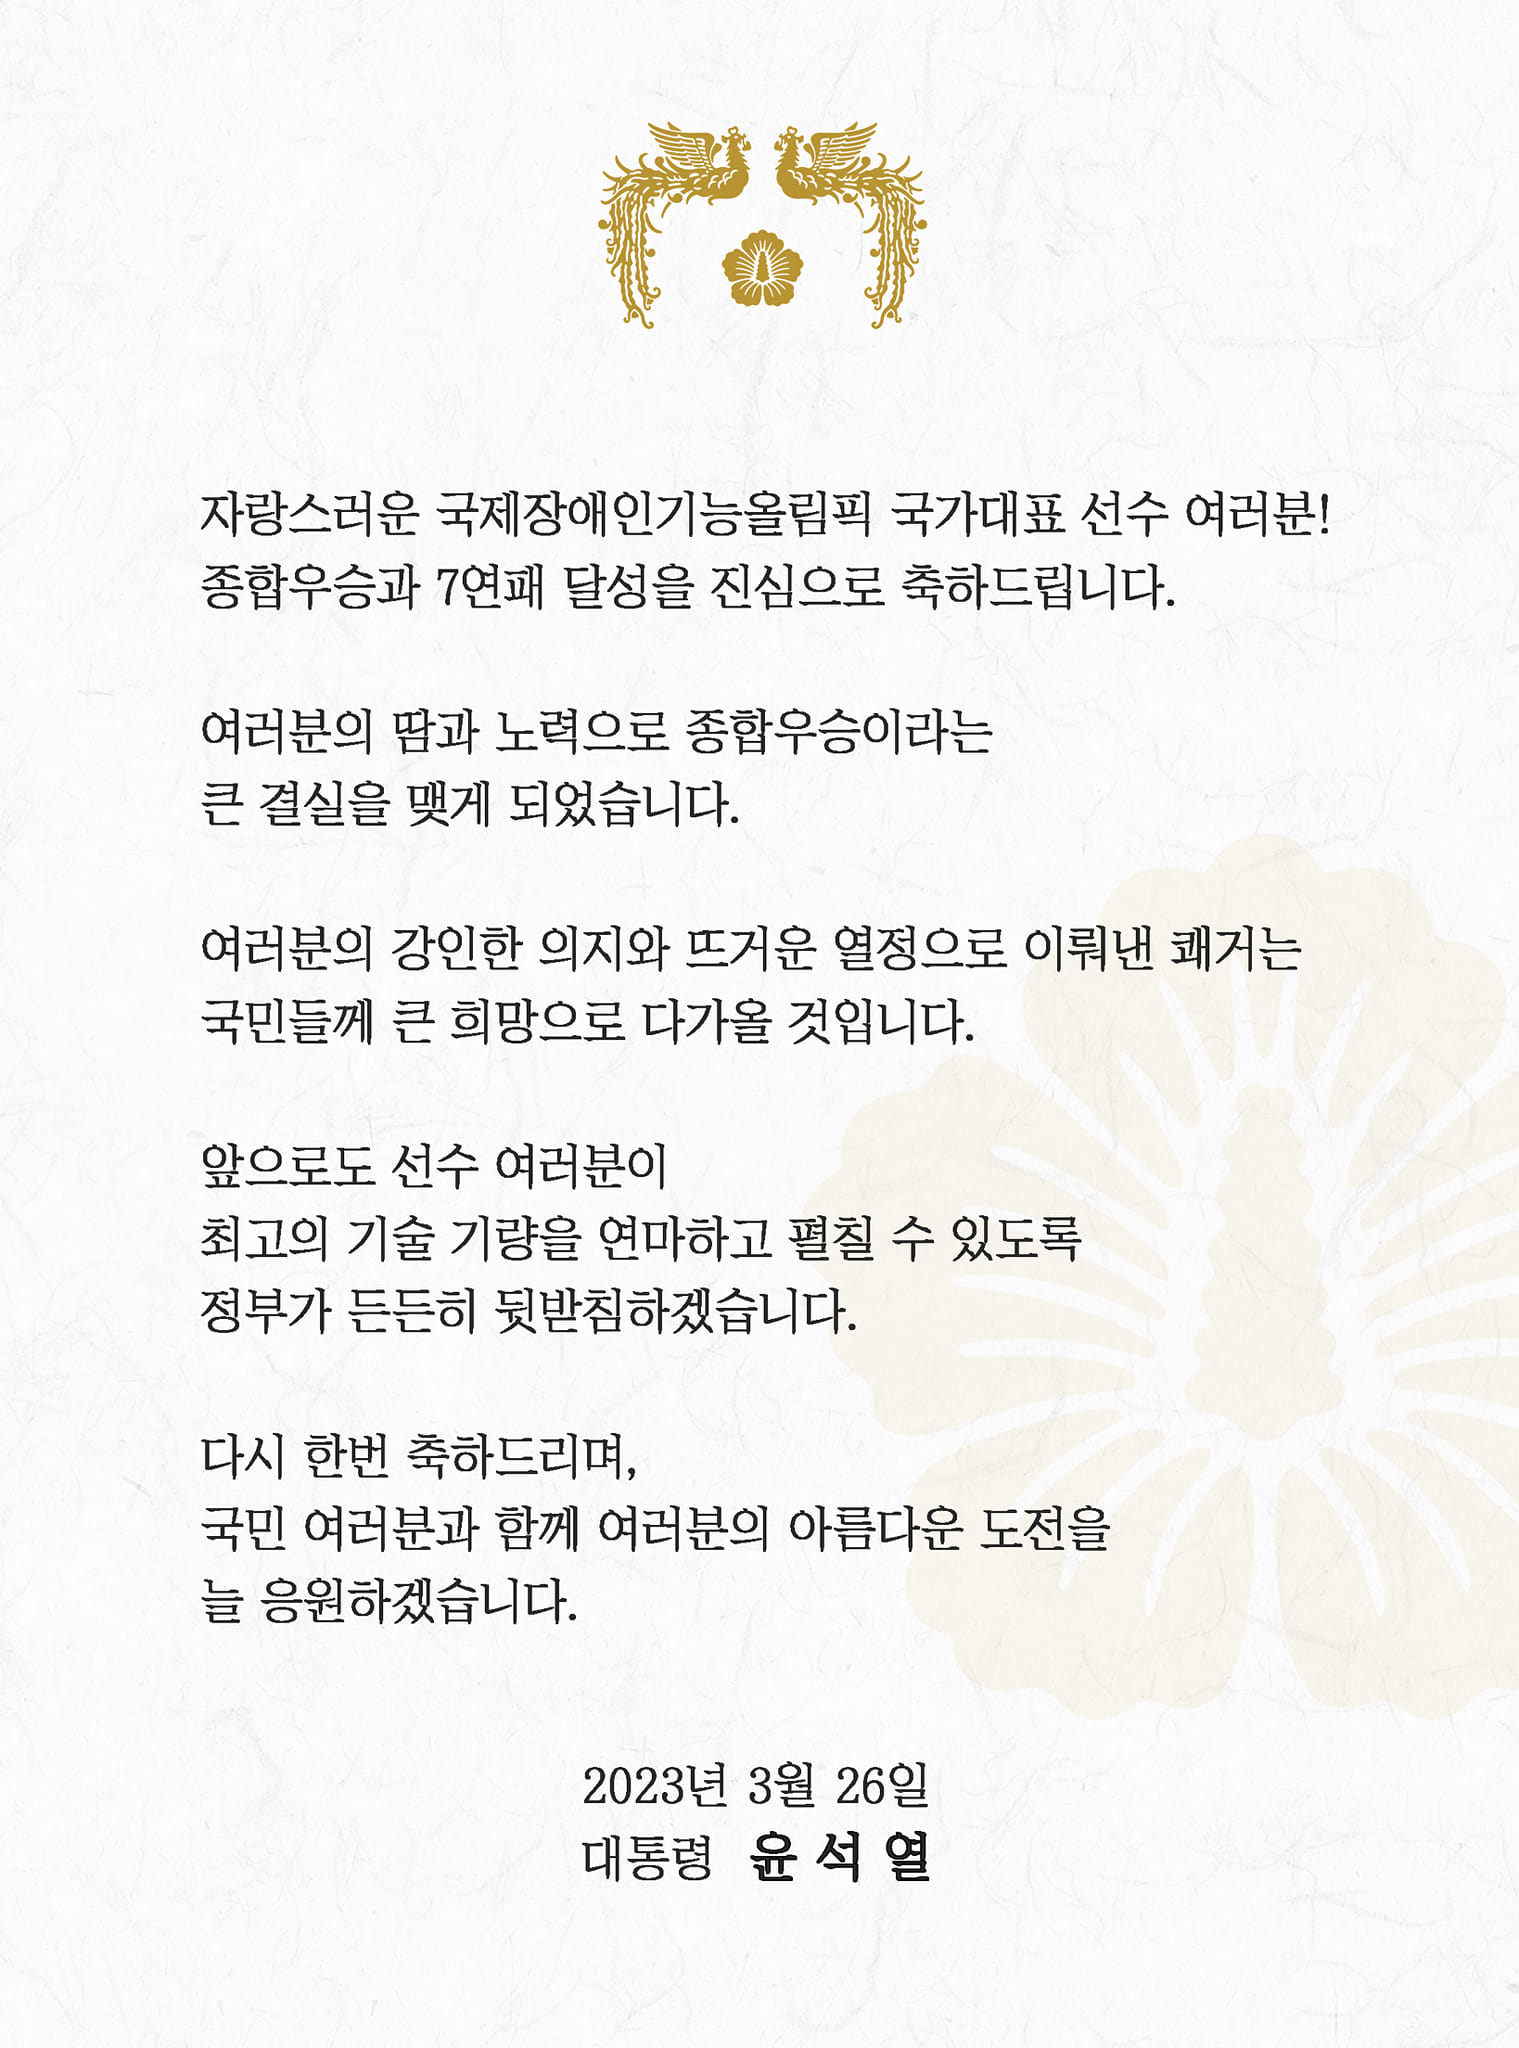 President Yoon Suk Yeol on March 26 uploaded a congratulatory message on his Facebook account to congratulate Team Korea's seventh straight win at the International Abilympics. (Screen capture from President Yoon's Facebook account) 